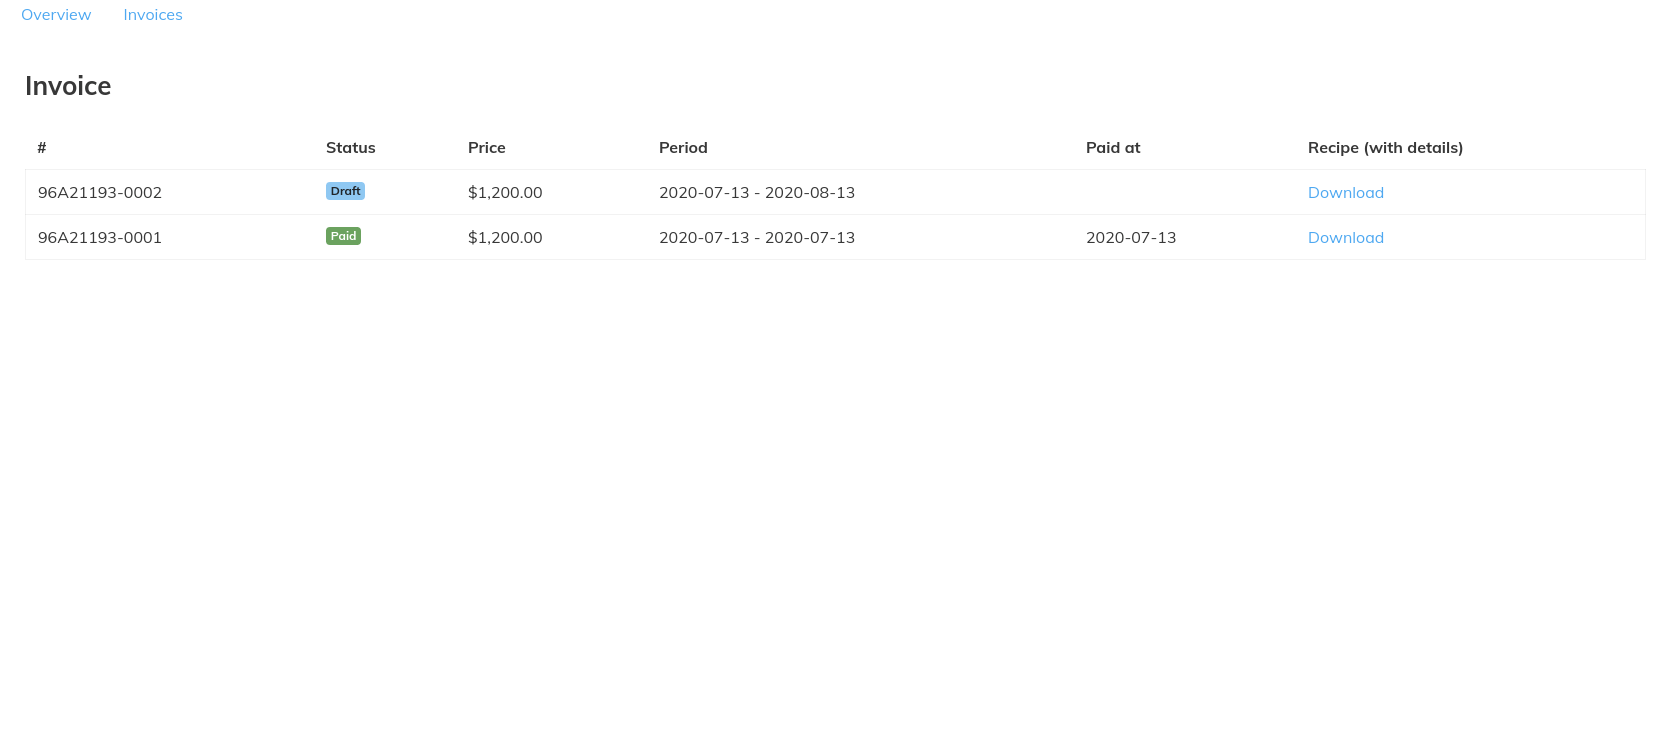 Invoices page